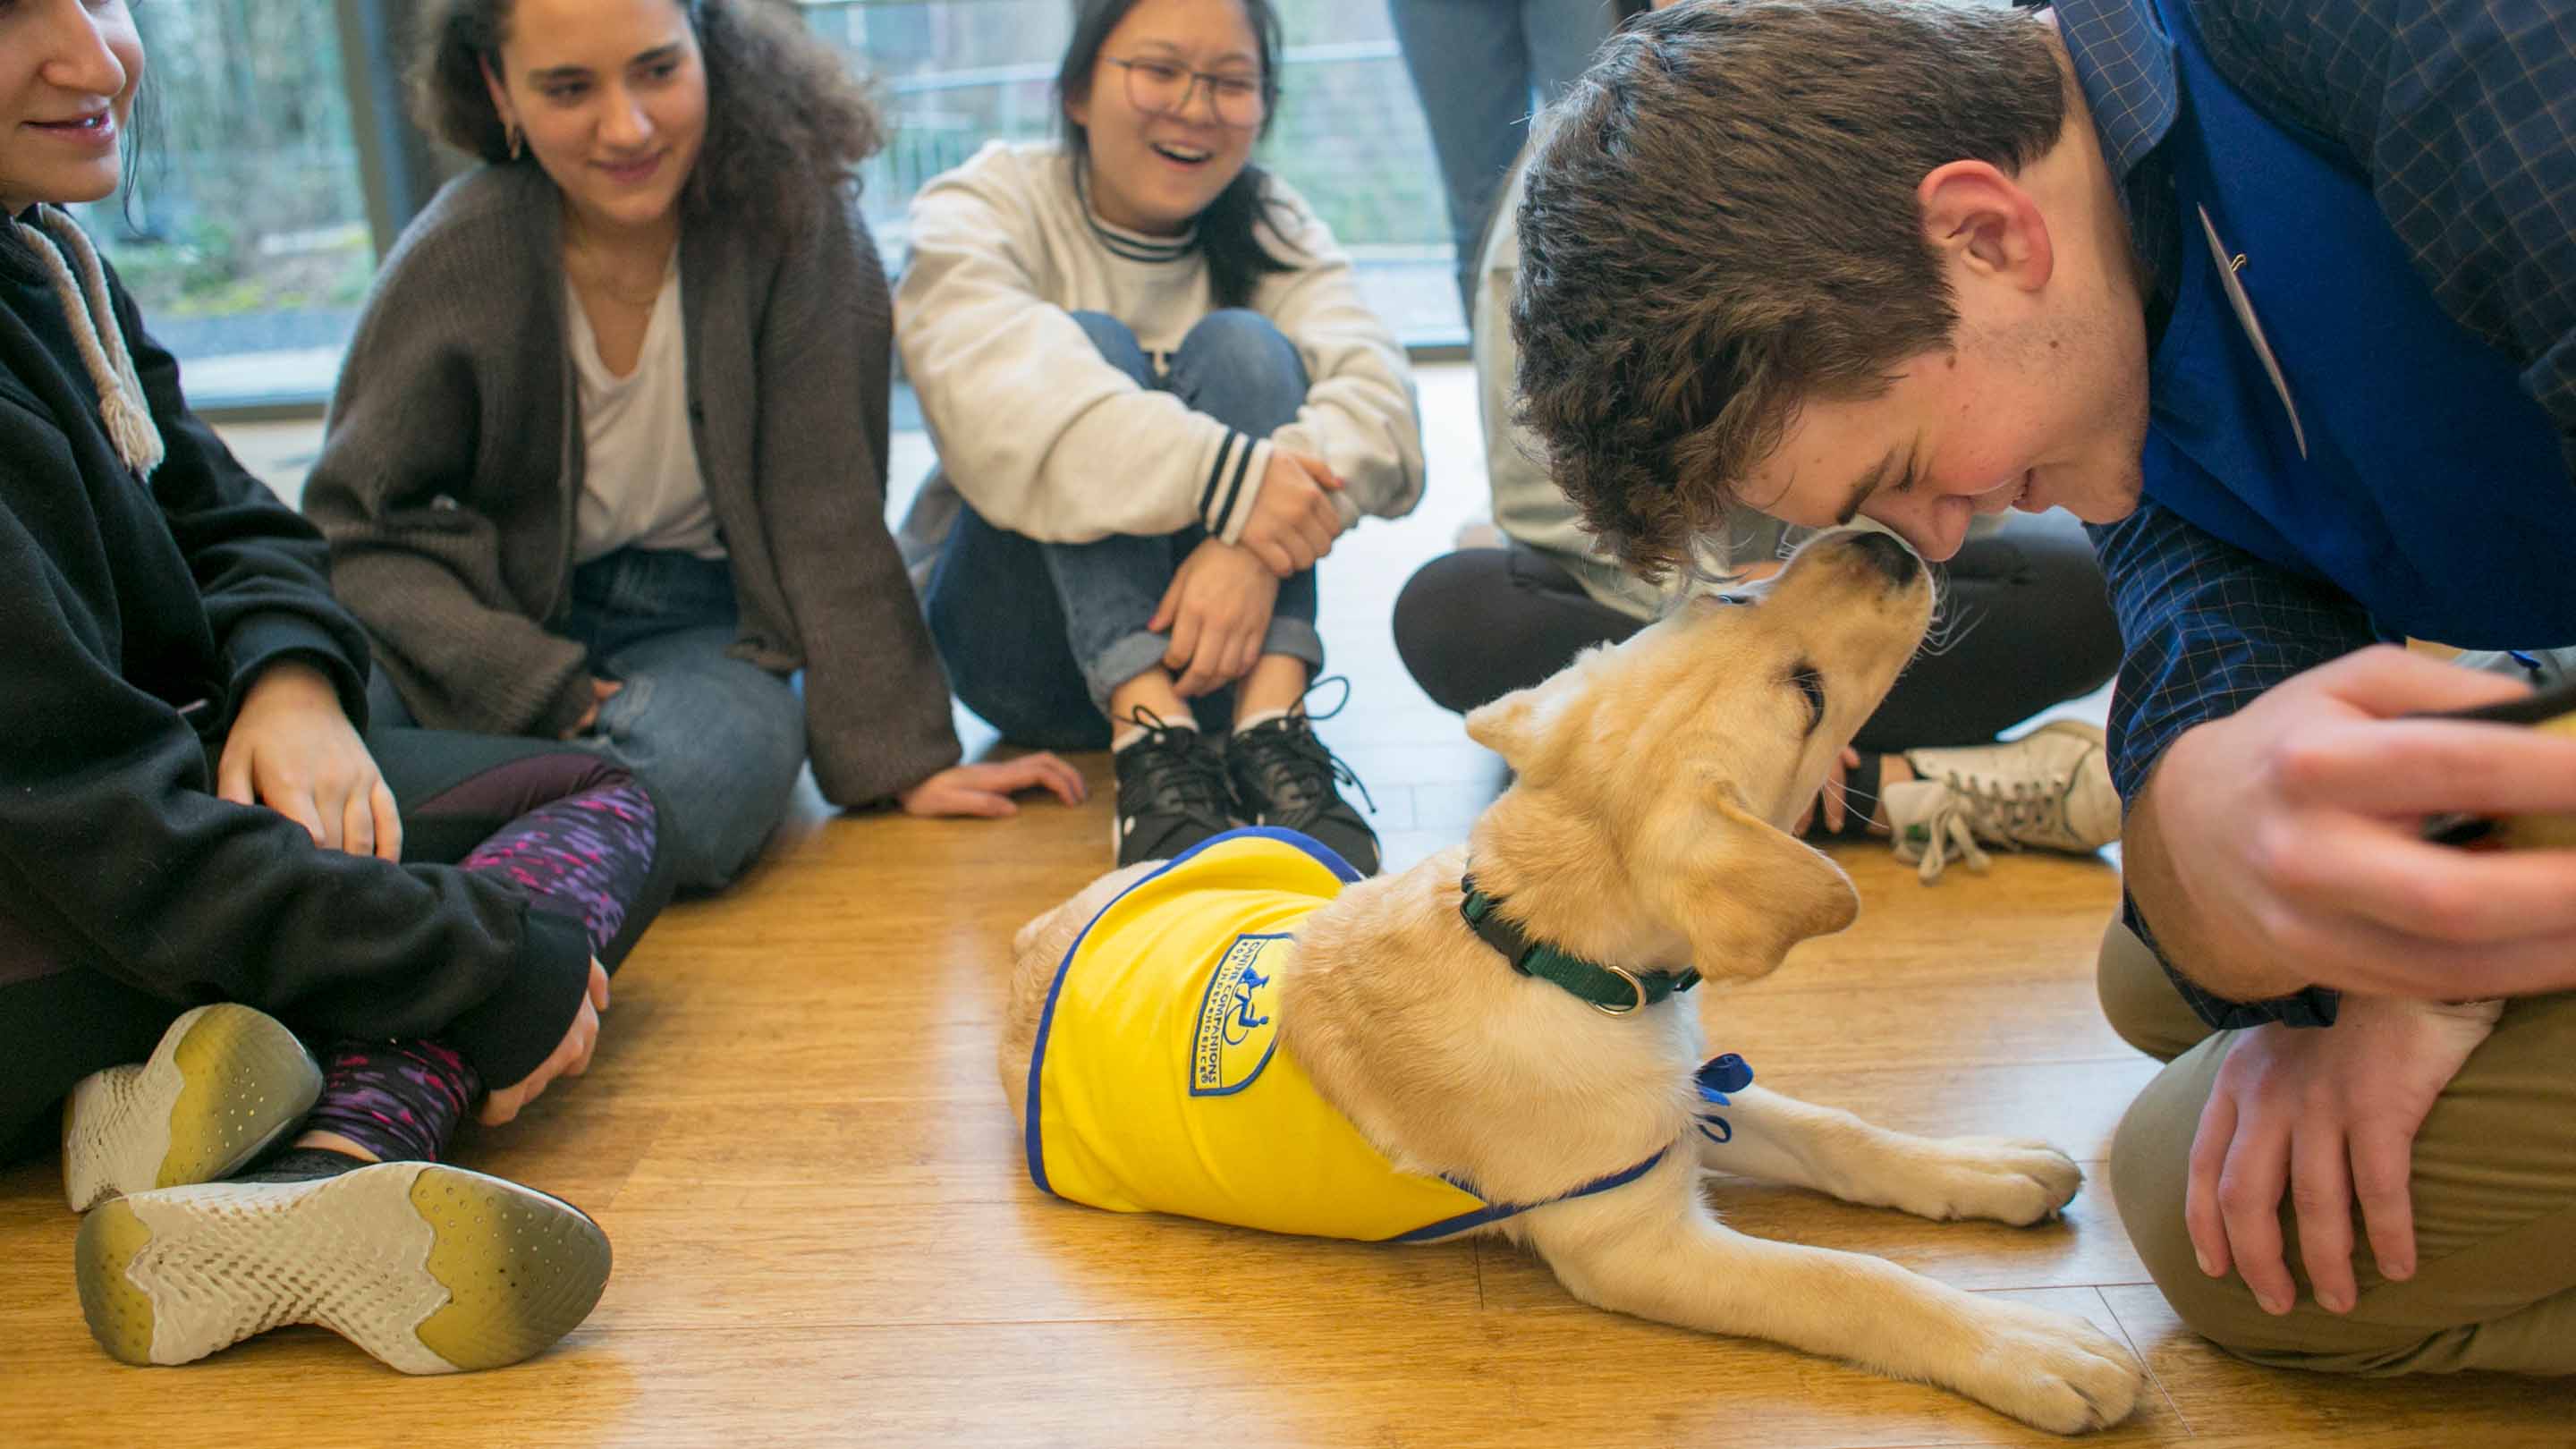 Students sitting around a puppy. One student is getting his face licked by a puppy.